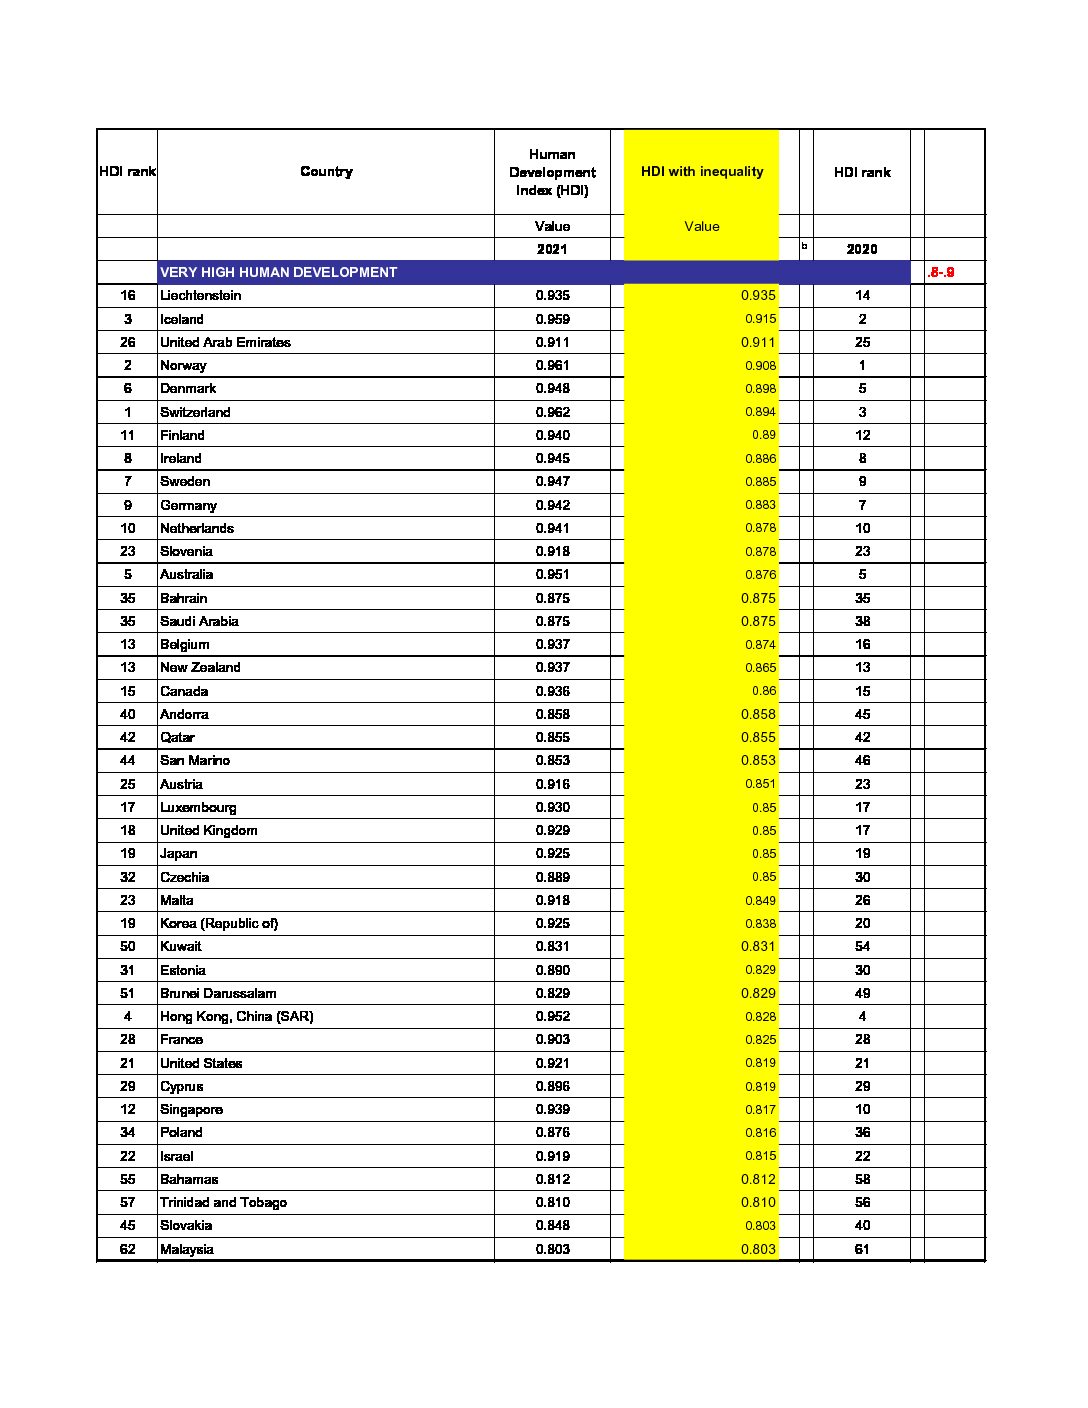 HDI_Index_21-22_Statistical_Annex_HDI_Table-V3-Final